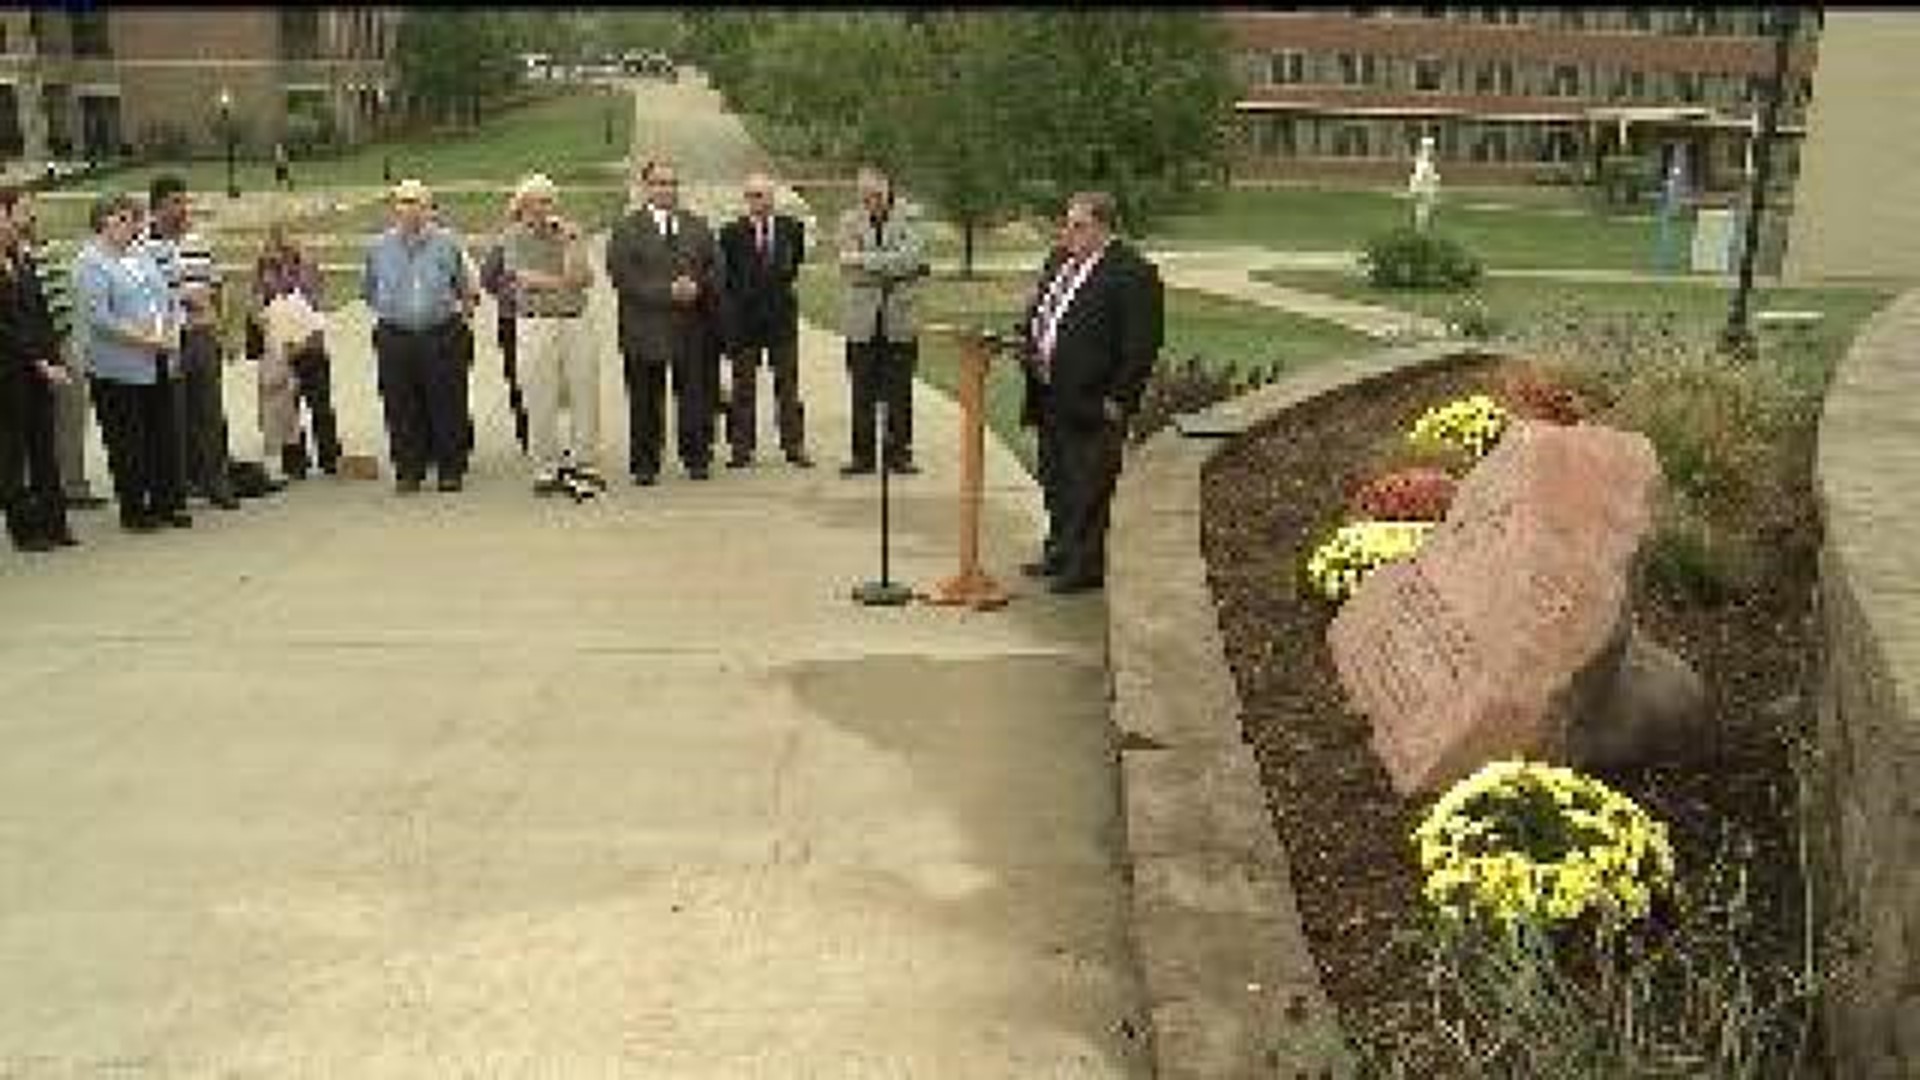 Monument dedicated at St. Ambrose in Davenport